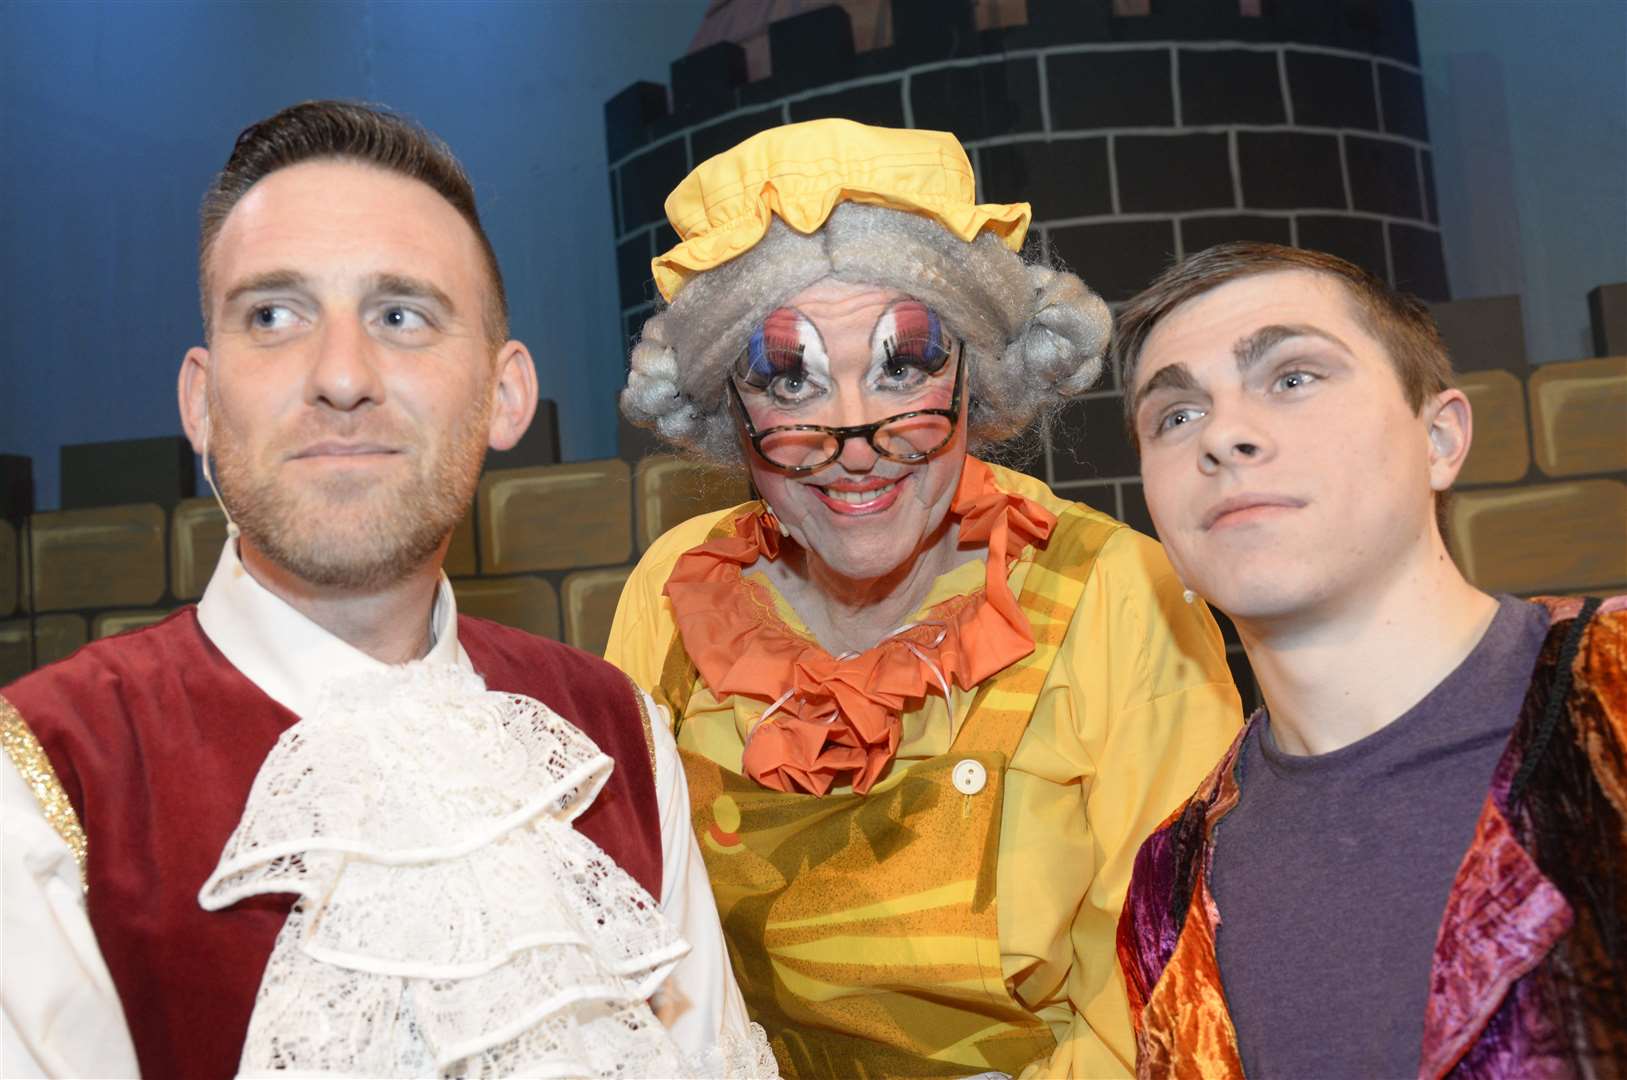 Matt Clayton as Bumble, Barry Clayton as The Dame and Harry Fields as Minstrel in a Blackfish Academy production of Sleeping Beauty. Picture: Chris Davey